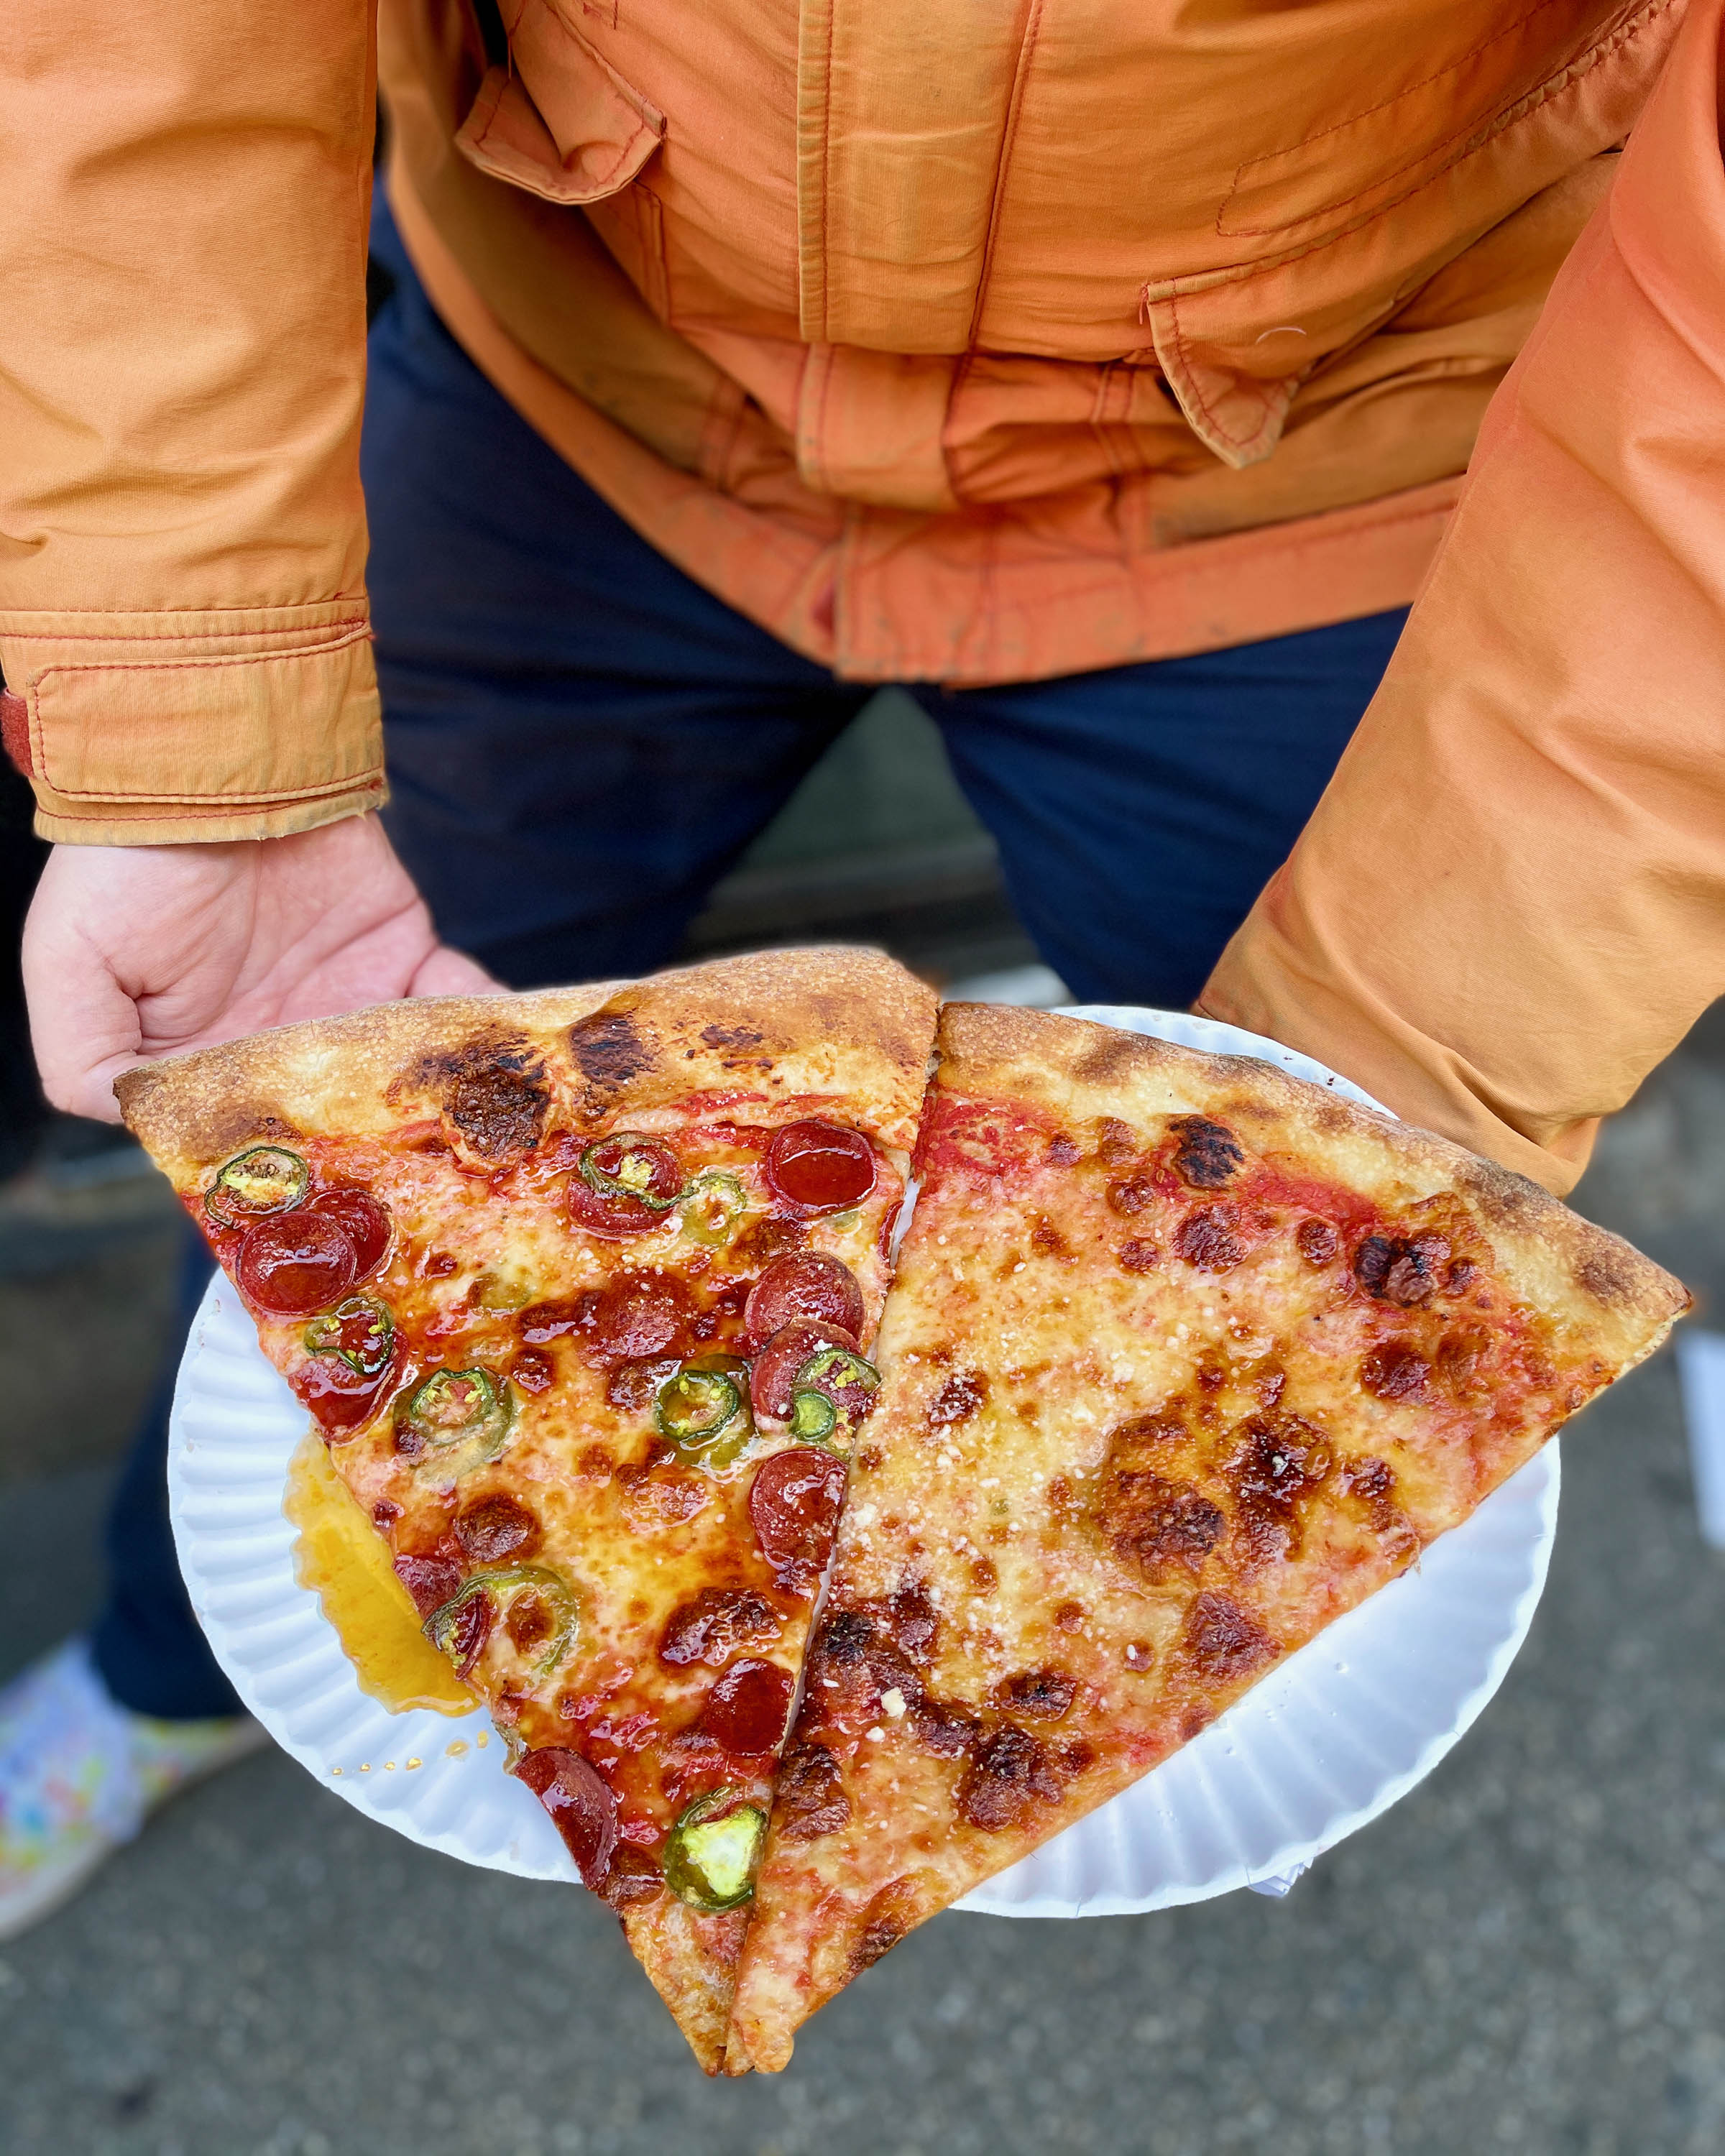 What's the Best New York Slice? I Ate at 30 Pizza Joints to Find